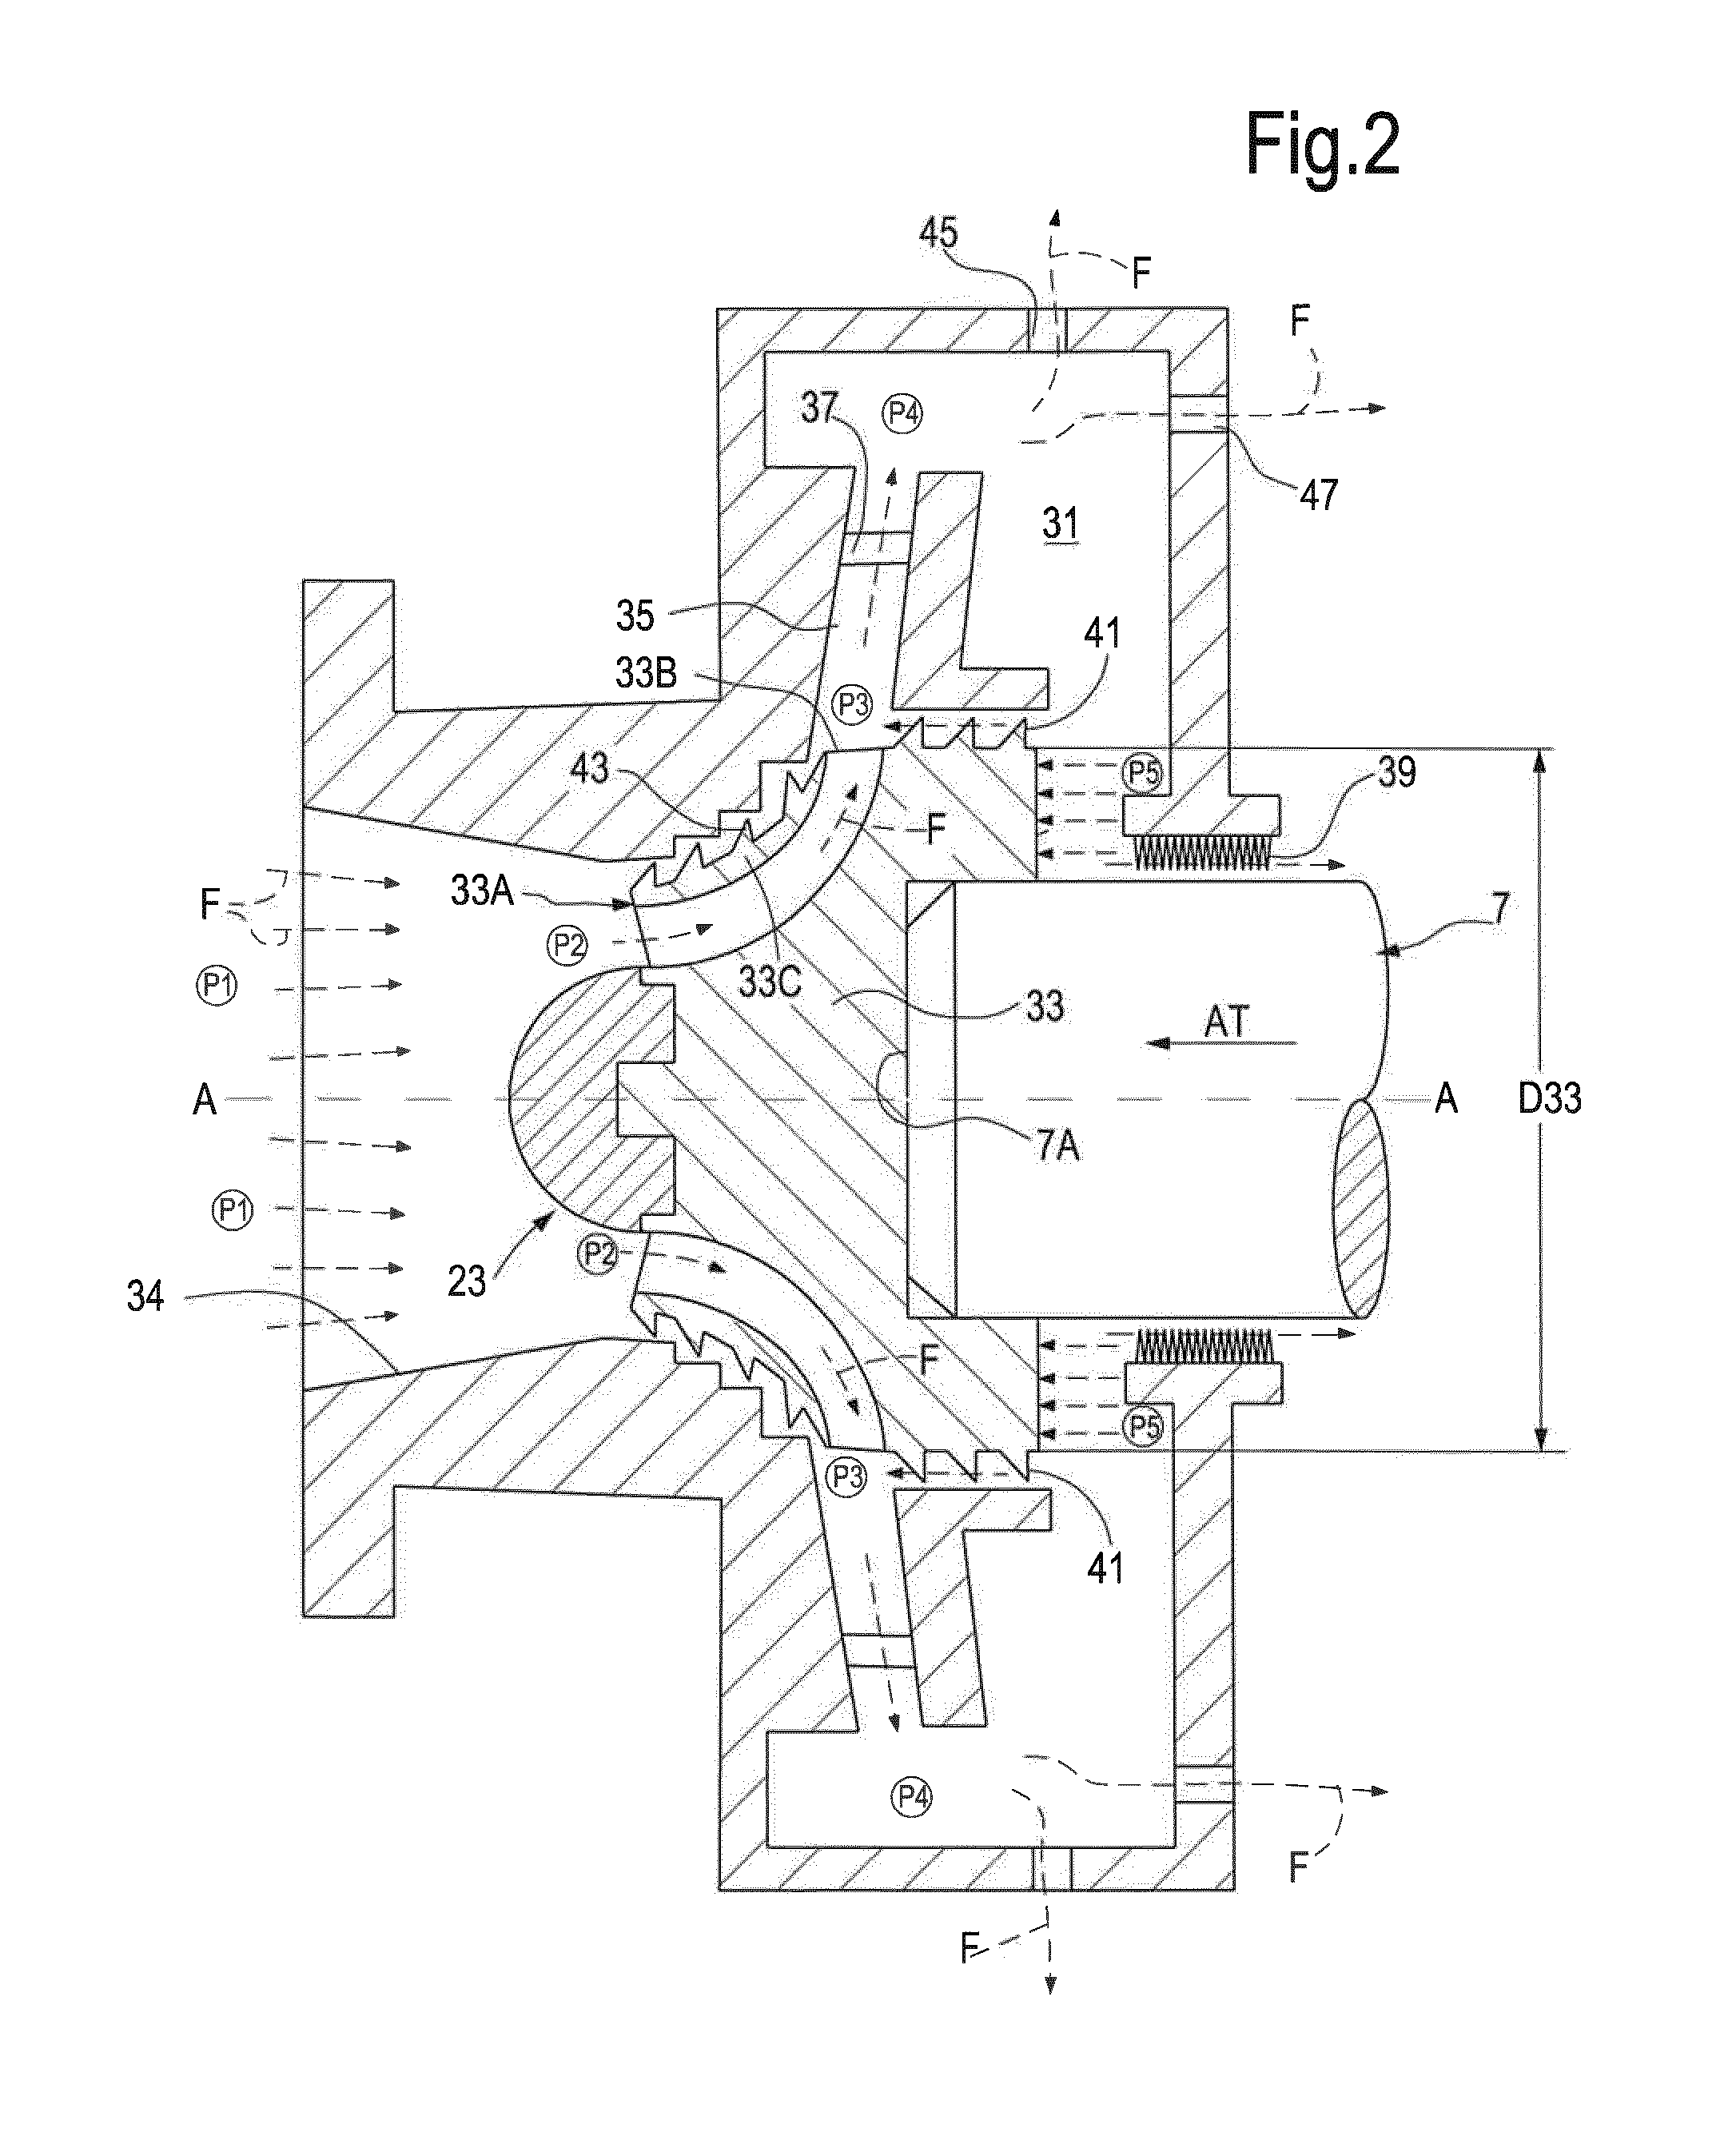 Fancooled electrical machine with axial thrust compensation